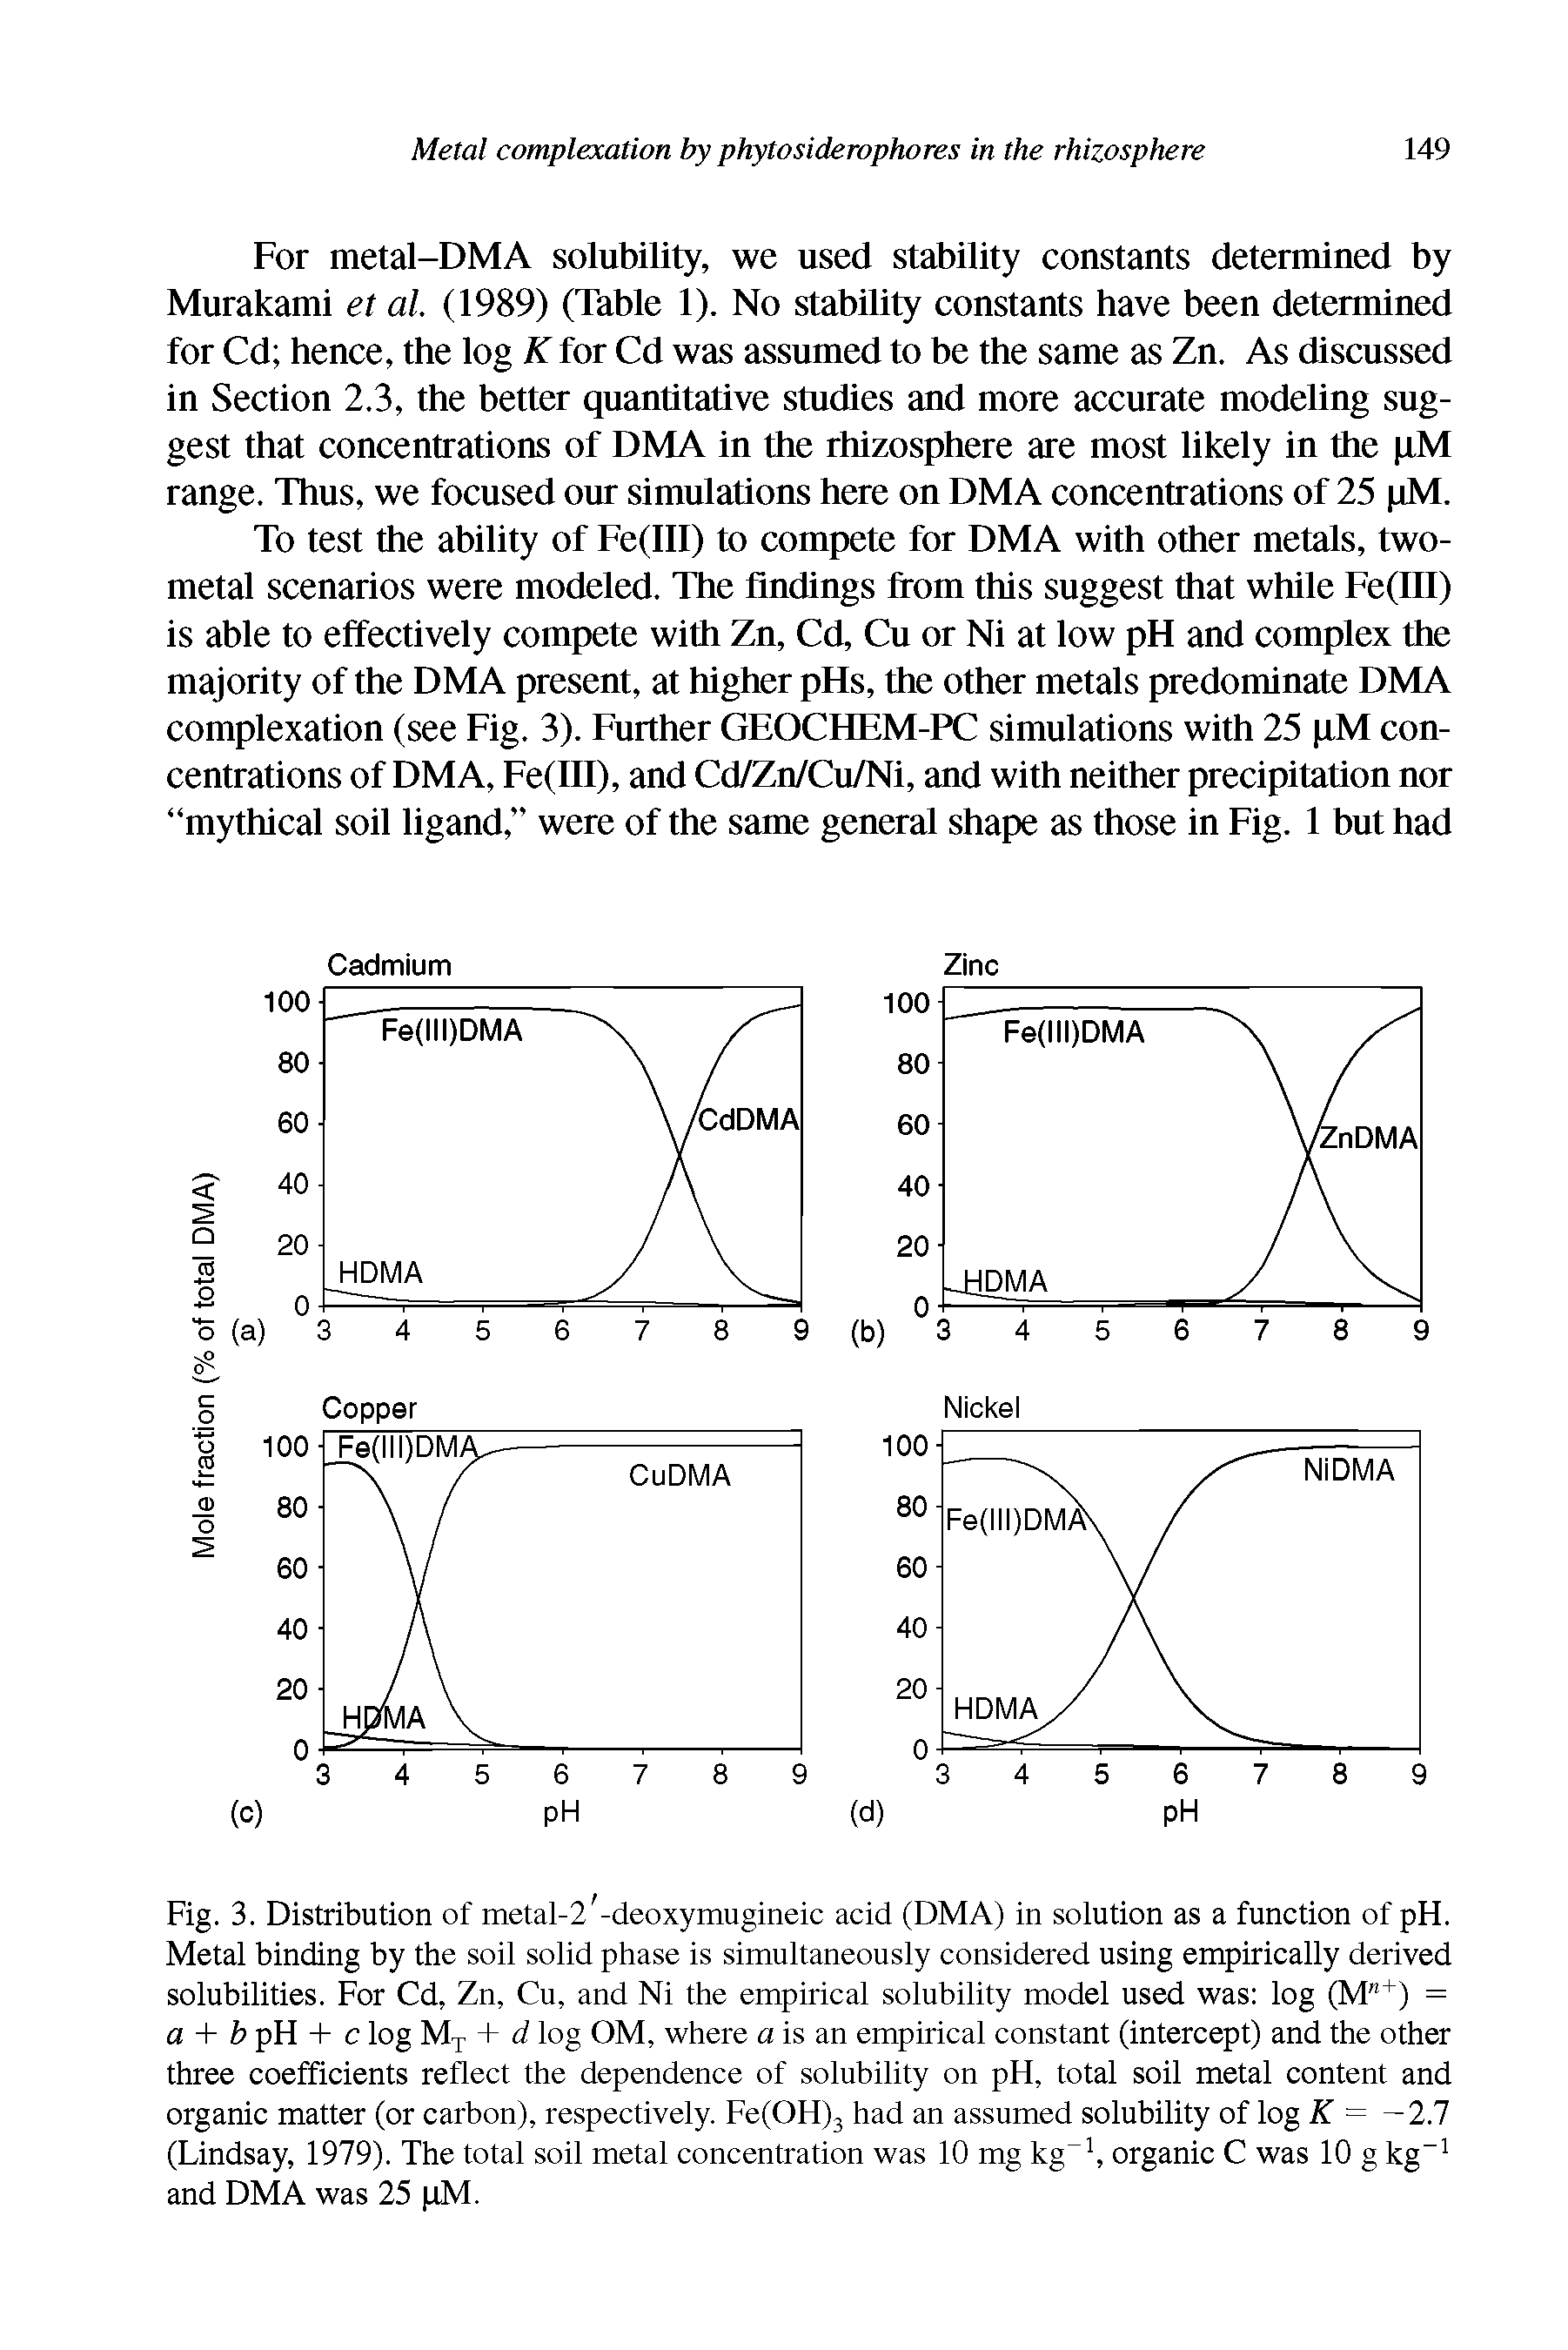 Fig. 3. Distribution of metal-2 -deoxymugineic acid (DMA) in solution as a function of pH. Metal binding by the soil solid phase is simultaneously considered using empirically derived solubilities. For Cd, Zn, Cu, and Ni the empirical solubility model used was log (M"+) = a + b pH + c log Mj + d log OM, where a is an empirical constant (intercept) and the other three coefficients reflect the dependence of solubility on pH, total soil metal content and organic matter (or carbon), respectively. Fe(OH)j had an assumed solubility of log K = —2.1 (Lindsay, 1979). The total soil metal concentration was 10 mg kg , organic C was 10 g kg and DMA was 25 iM.